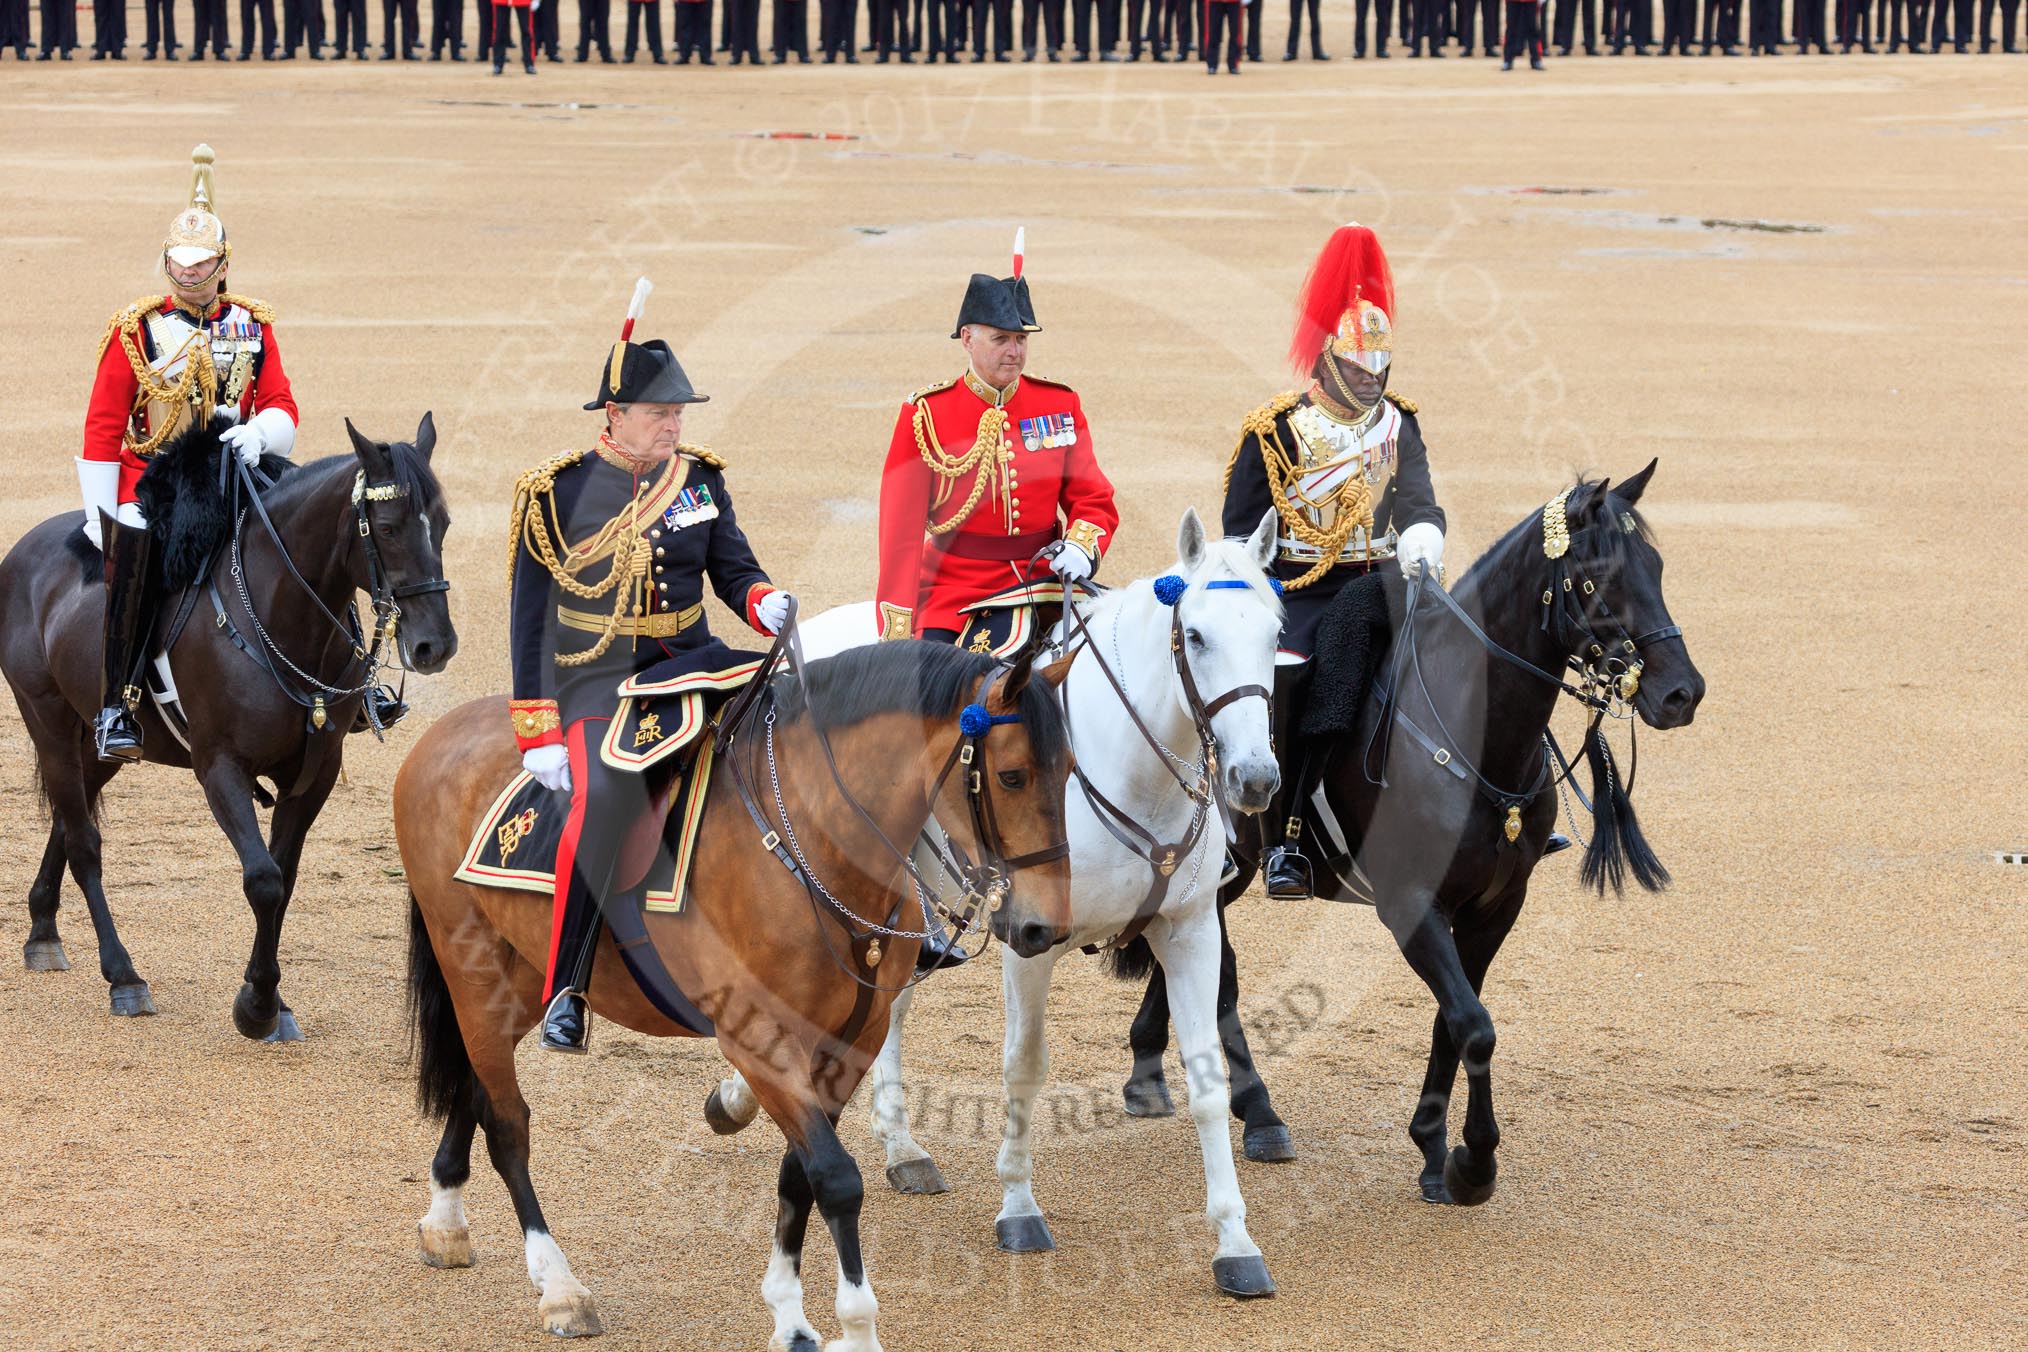 during The Colonel's Review {iptcyear4} (final rehearsal for Trooping the Colour, The Queen's Birthday Parade)  at Horse Guards Parade, Westminster, London, 2 June 2018, 11:06.